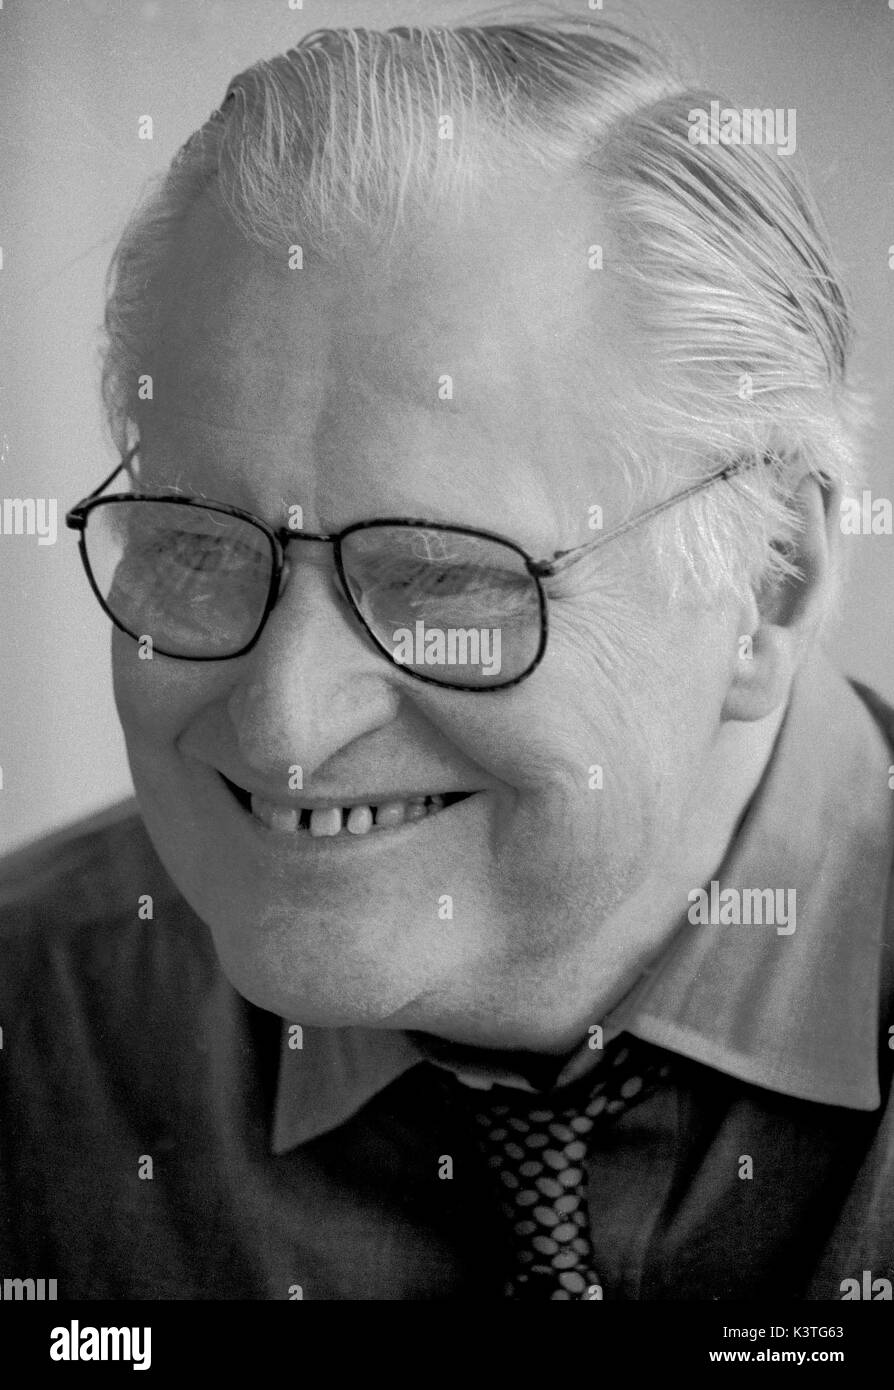 File: 3rd Sep, 2017. John Ashbery distinguished American poet & critic Photo taken: 19th May 2000. Mr Ashbery received many awards during his lifetime (1927-2017). Identified as among  members of the New York School (of Poets) he won the Pulitzer Prize for for his 1975 book Self-Portrait in a Convex Mirror. In 2012 he received the National Humanities Medal from president Barack Obama. He was a longtime member for life of the American Academy of Arts & Letters. His words were simple. He wrote simply. The results were tantalizing in their indirection. Credit: Dorothy Alexander, Alamy Live News Stock Photo